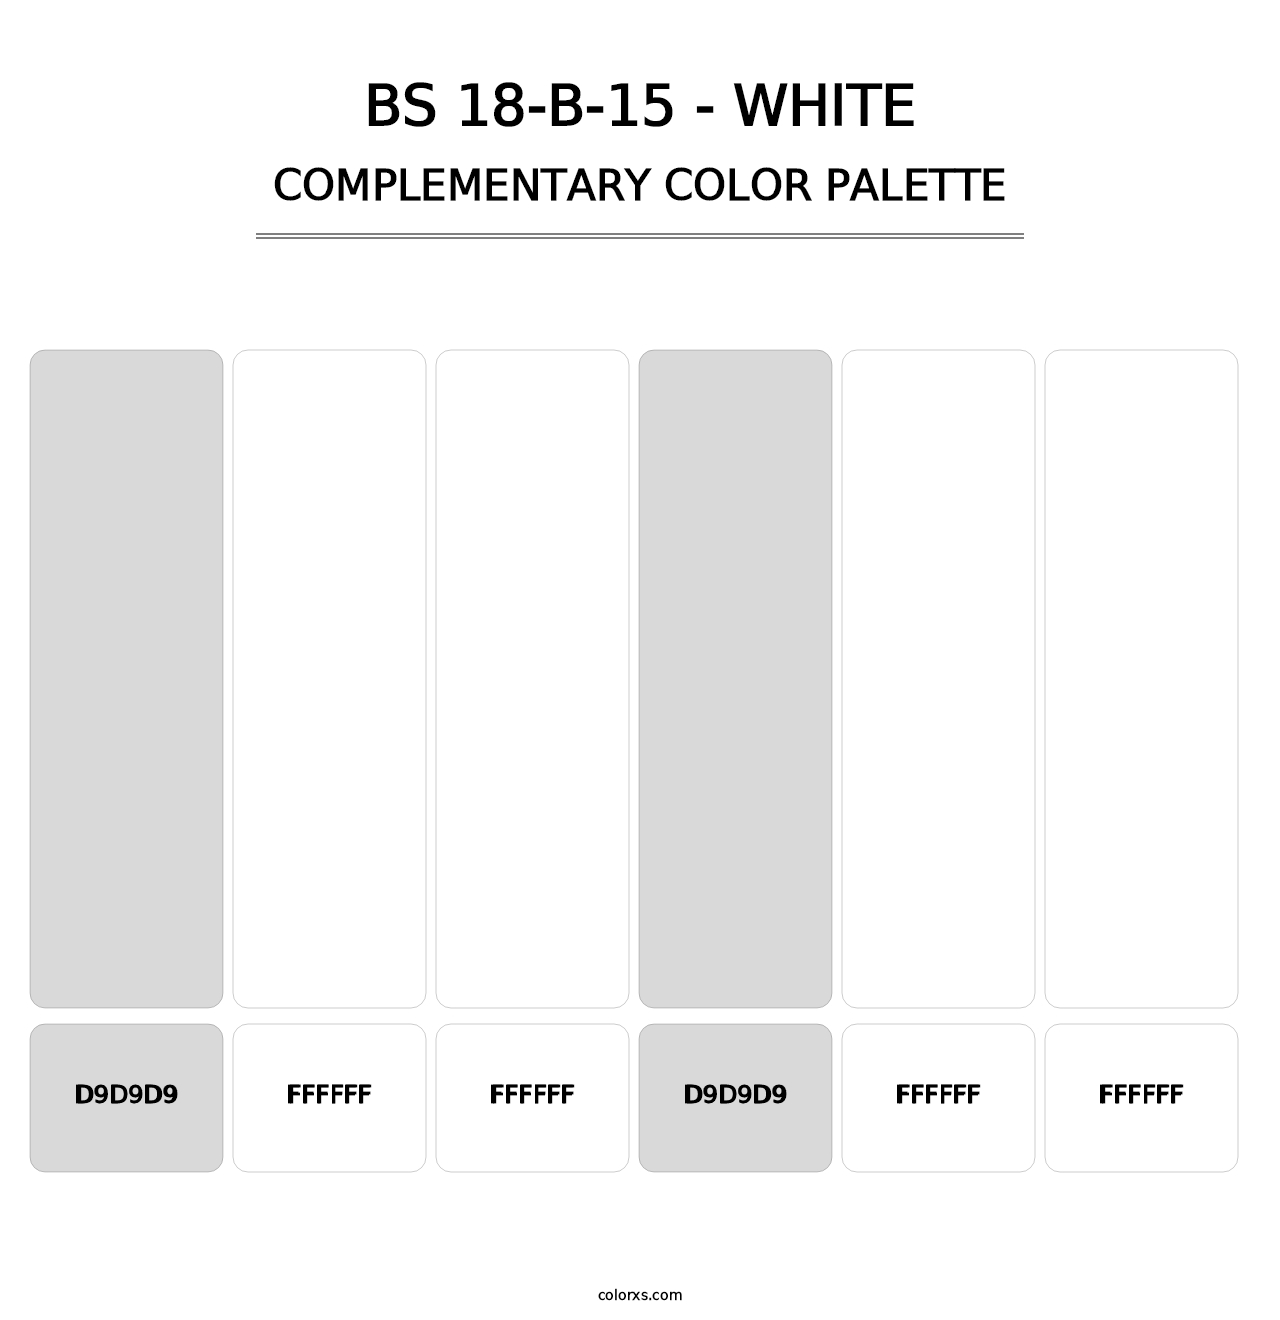 BS 18-B-15 - White - Complementary Color Palette